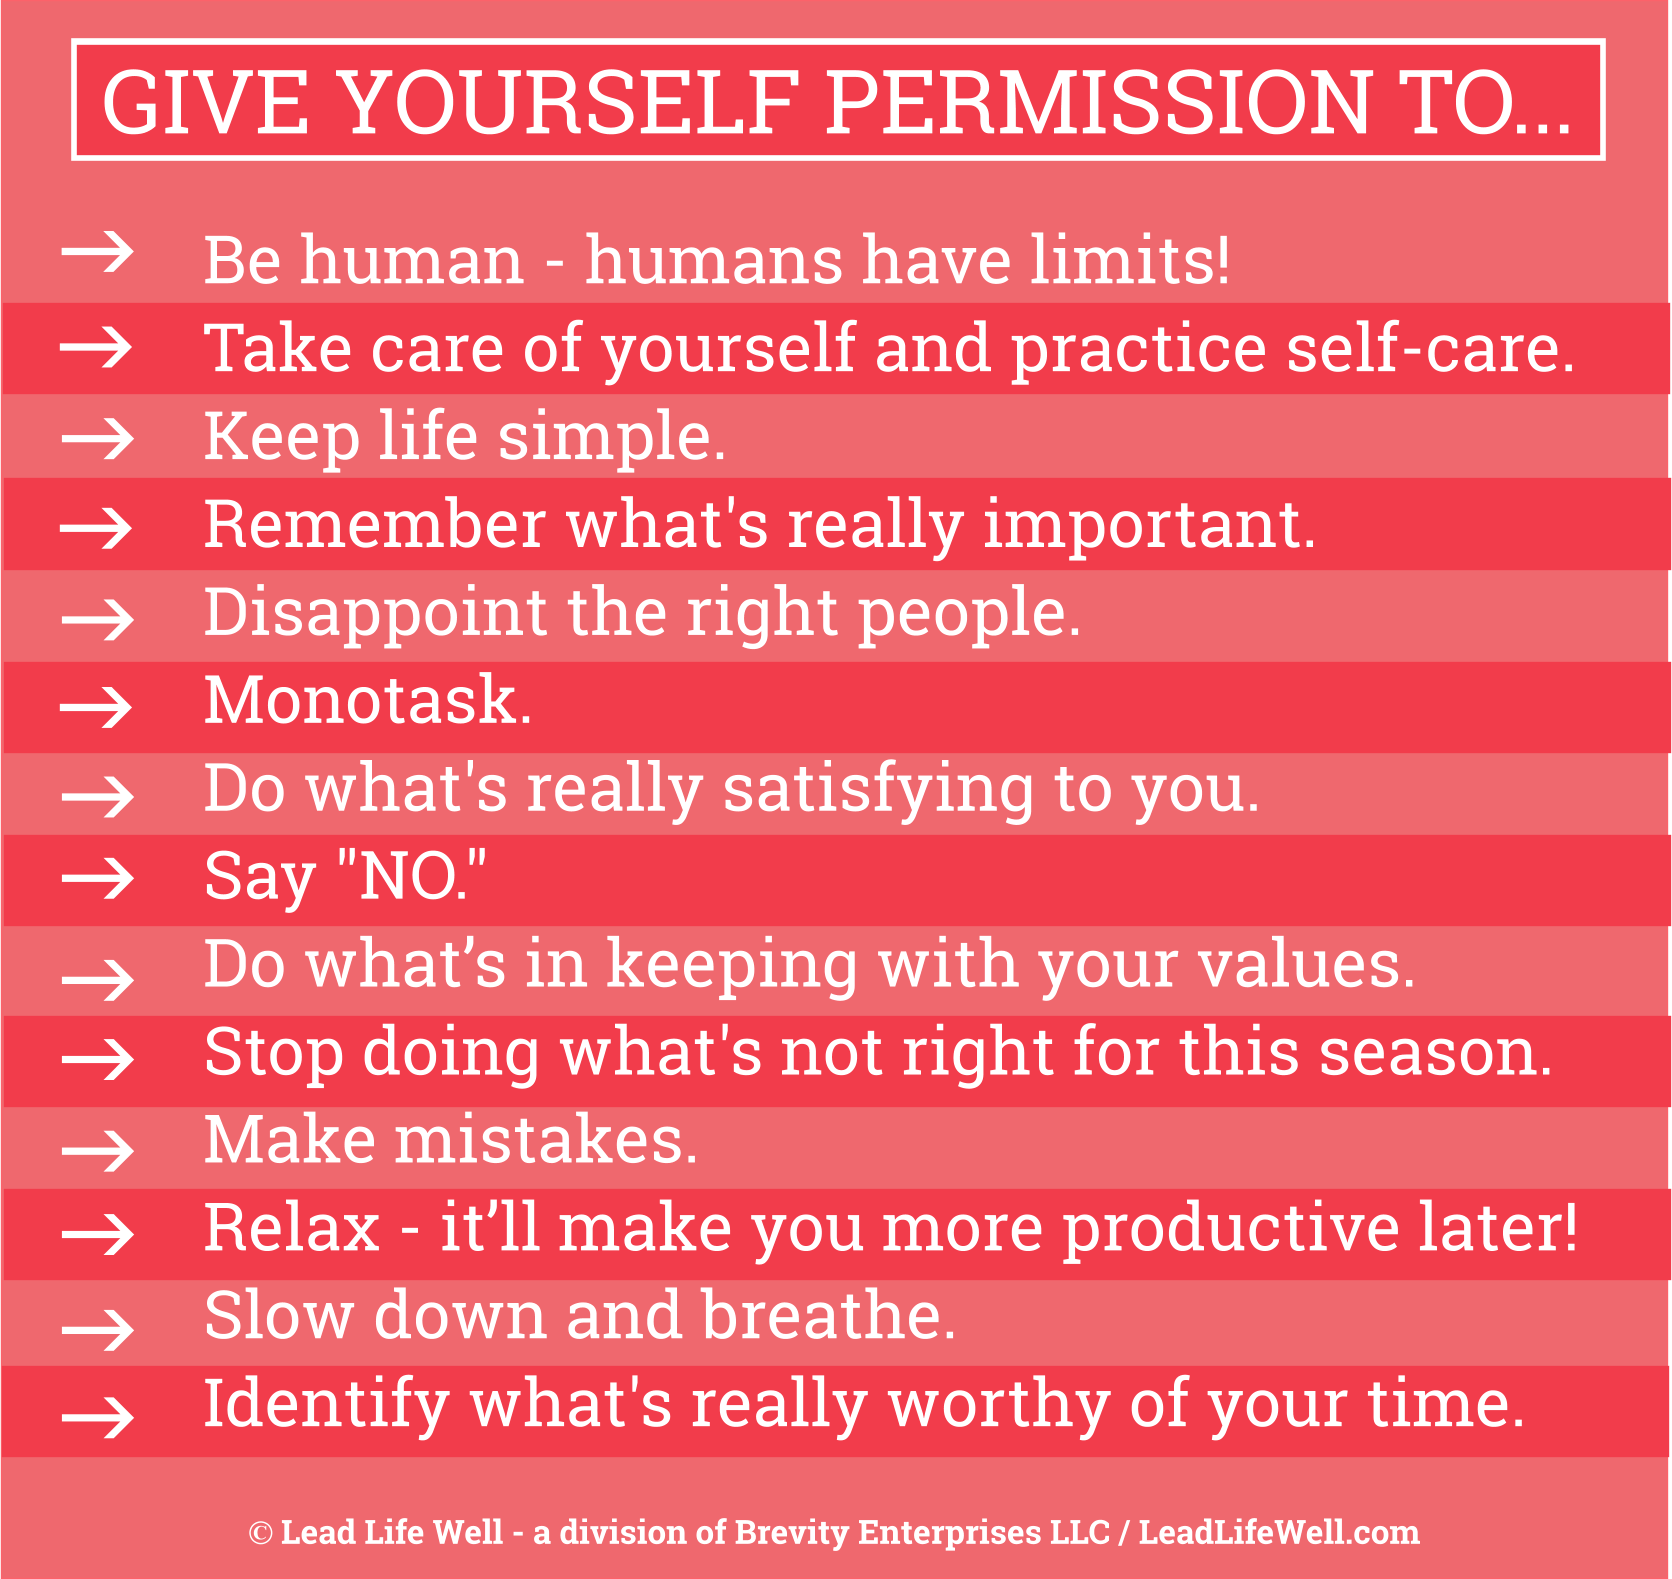 Give Yourself Permission To...